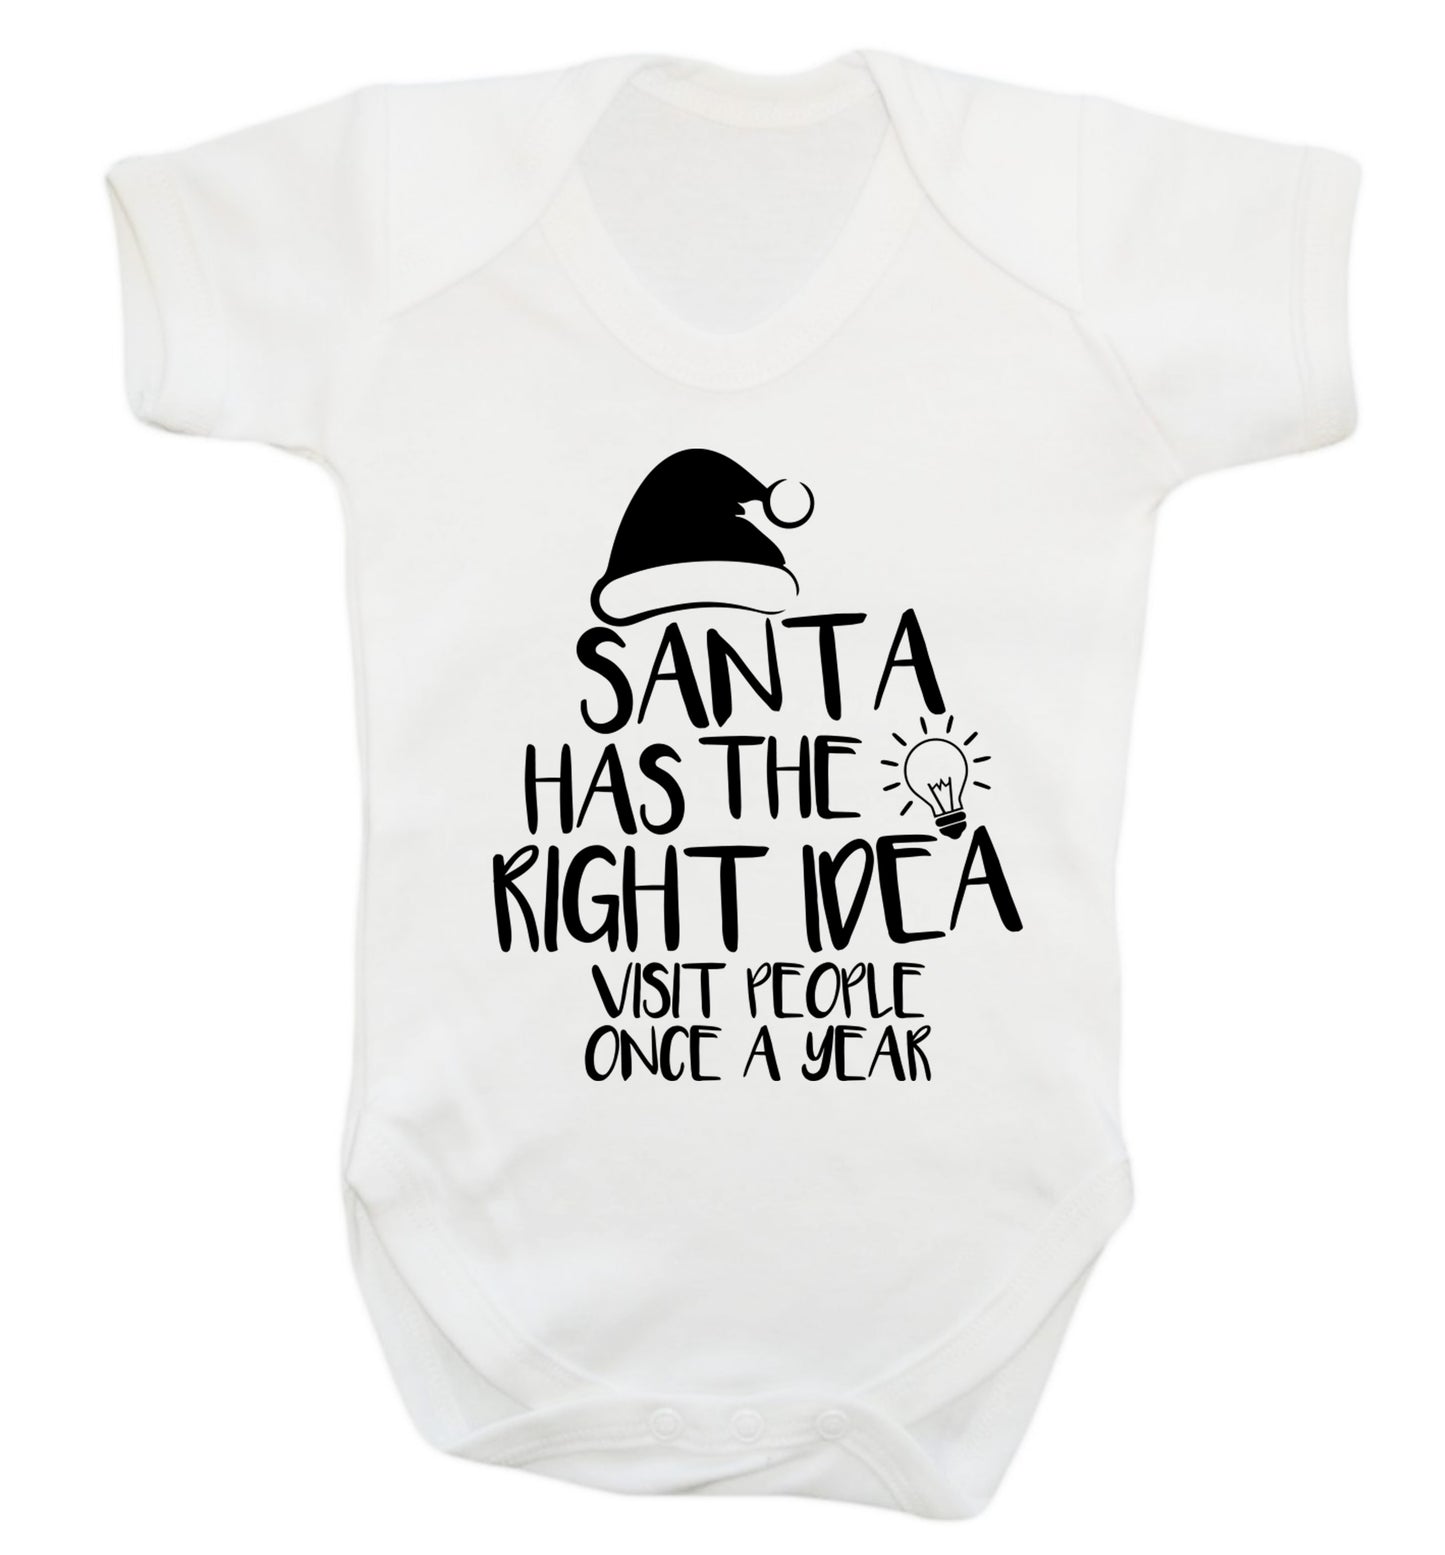 Santa has the right idea visit people once a year Baby Vest white 18-24 months